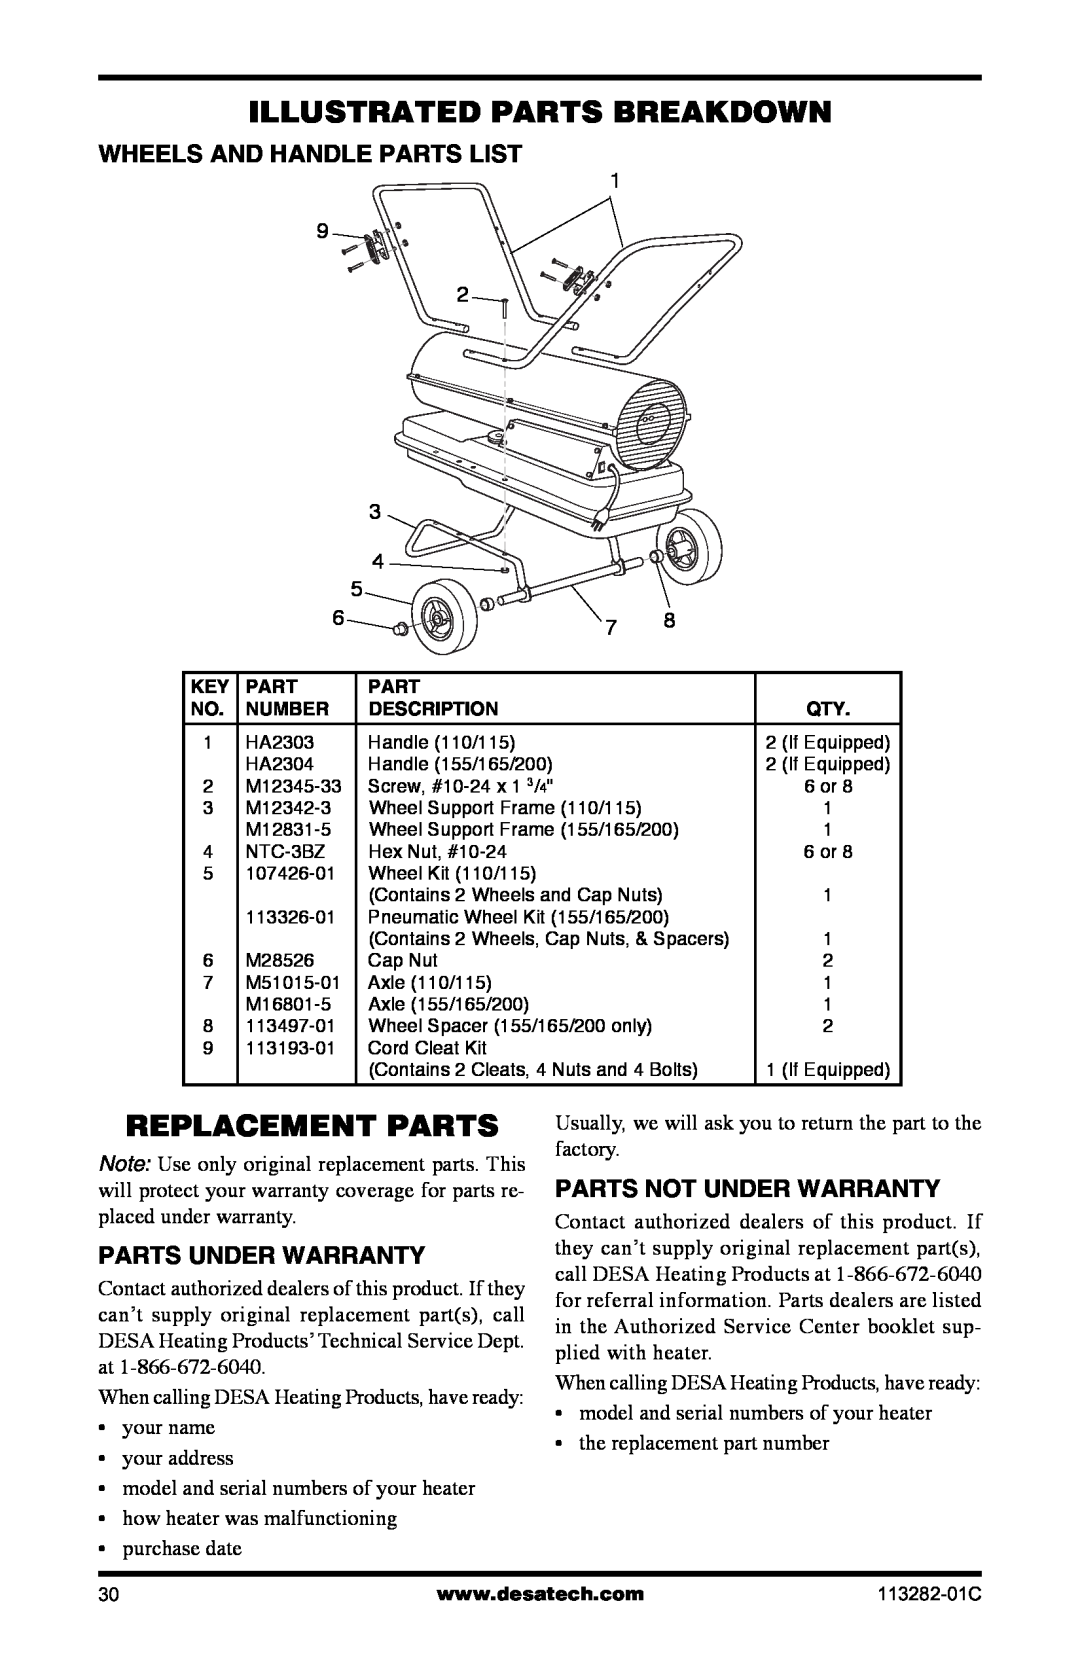 Desa BTU/HR owner manual Replacement Parts, Illustrated Parts Breakdown, Wheels And Handle Parts List, Parts Under Warranty 